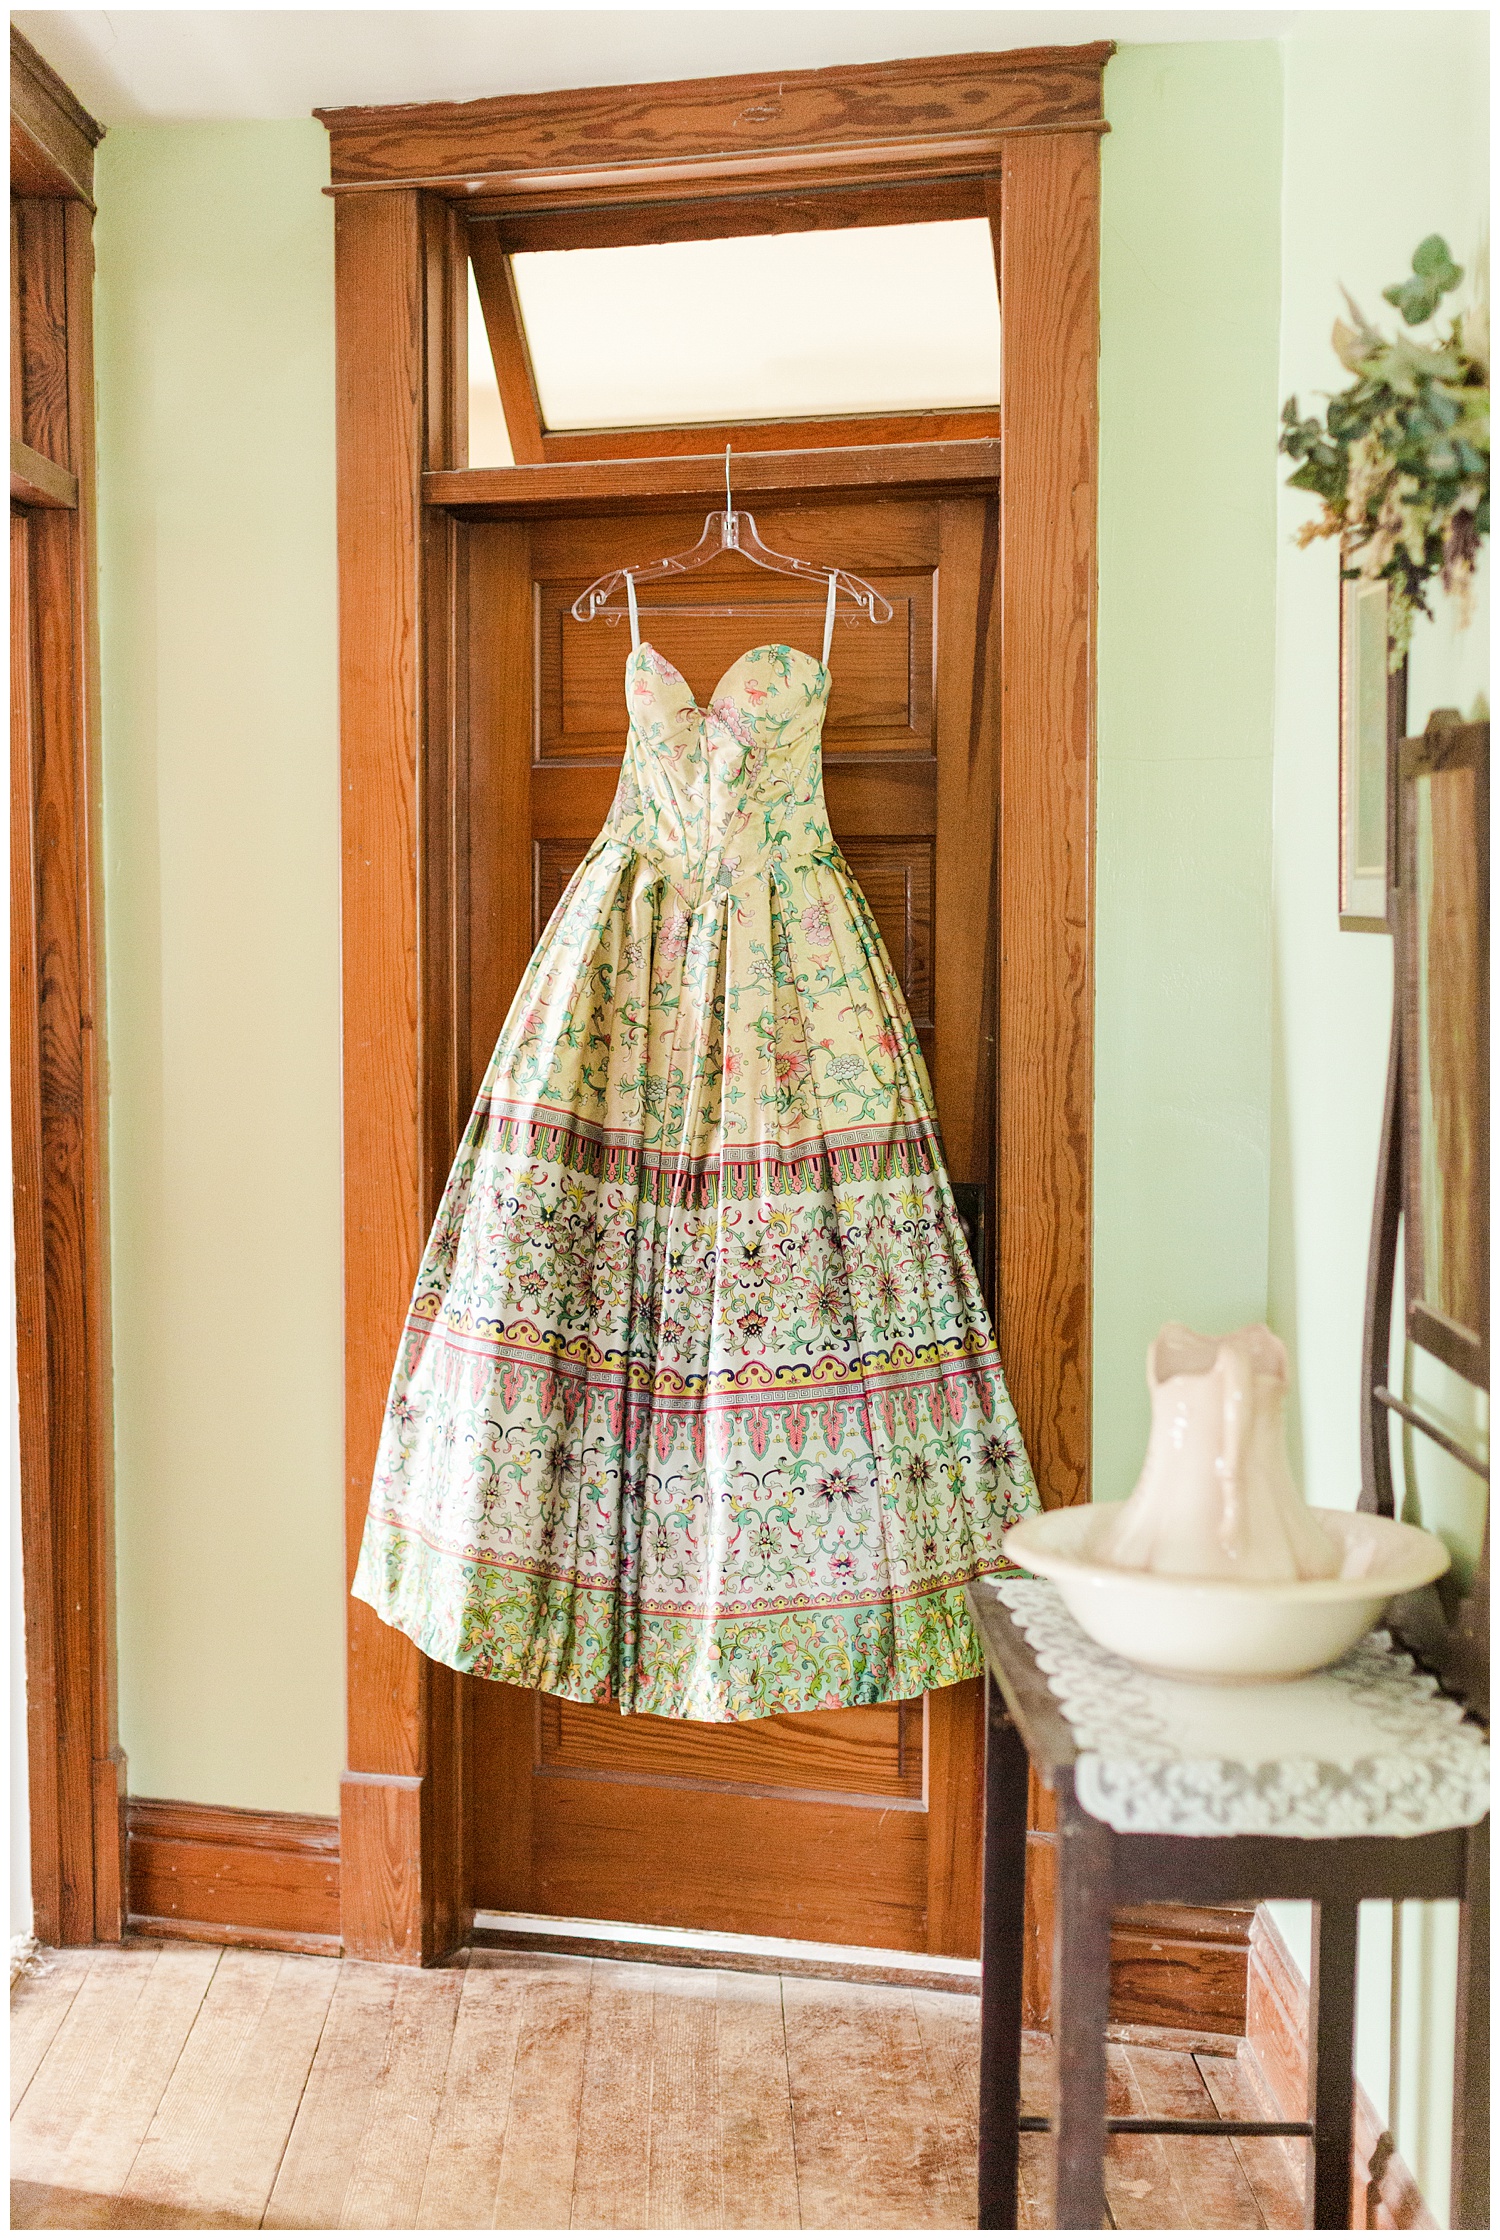 Michaela's vintage style prom dress hangs from a wooden door in an 115 year old home | CB Studio